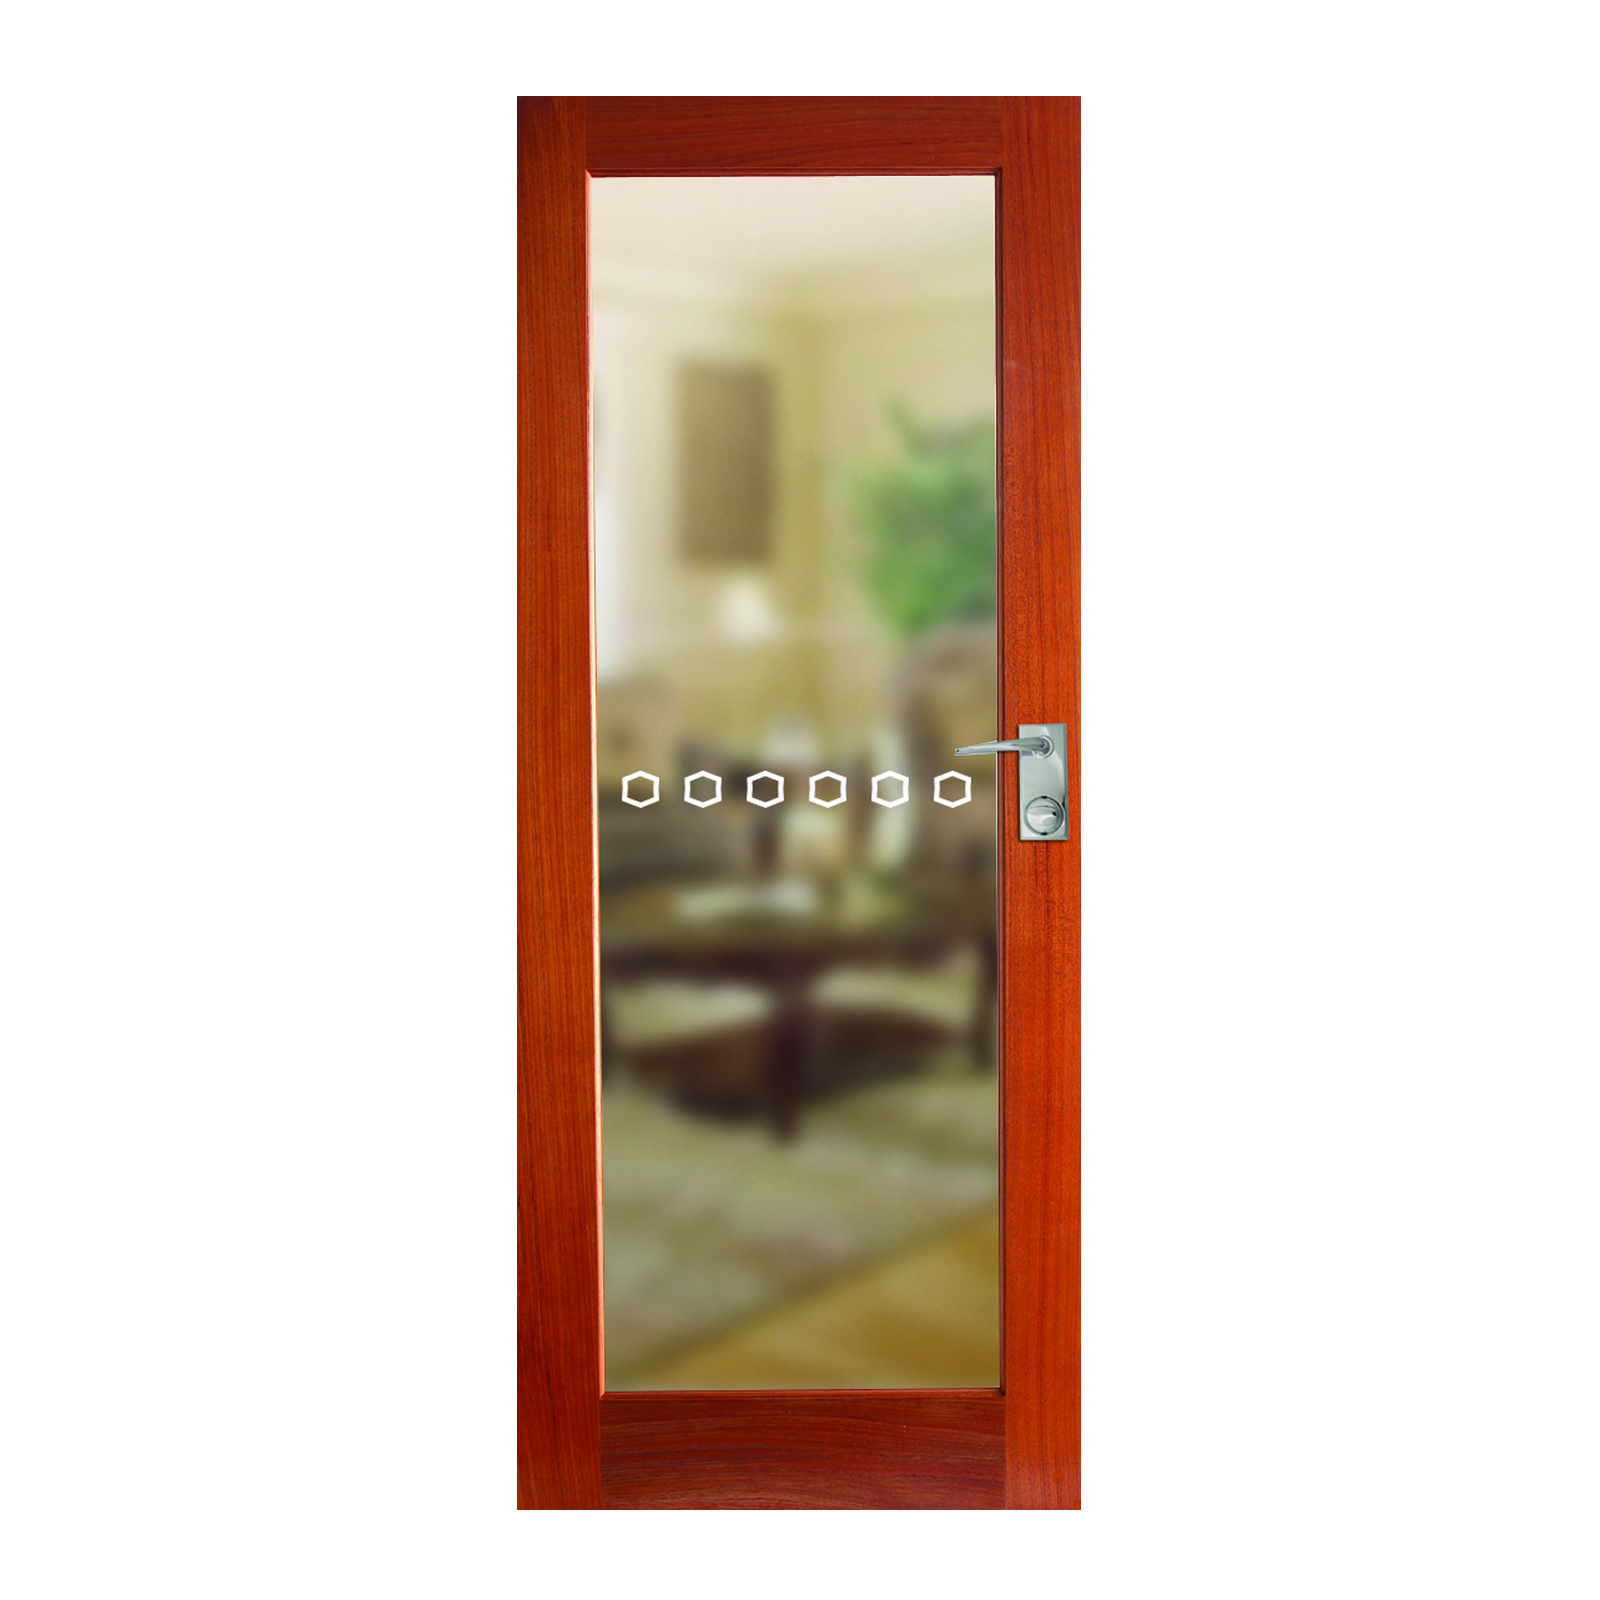 Hume Doors & Timber 2040 x 820 x 40mm Joinery 1LITE Entrance Door With Clear Glass